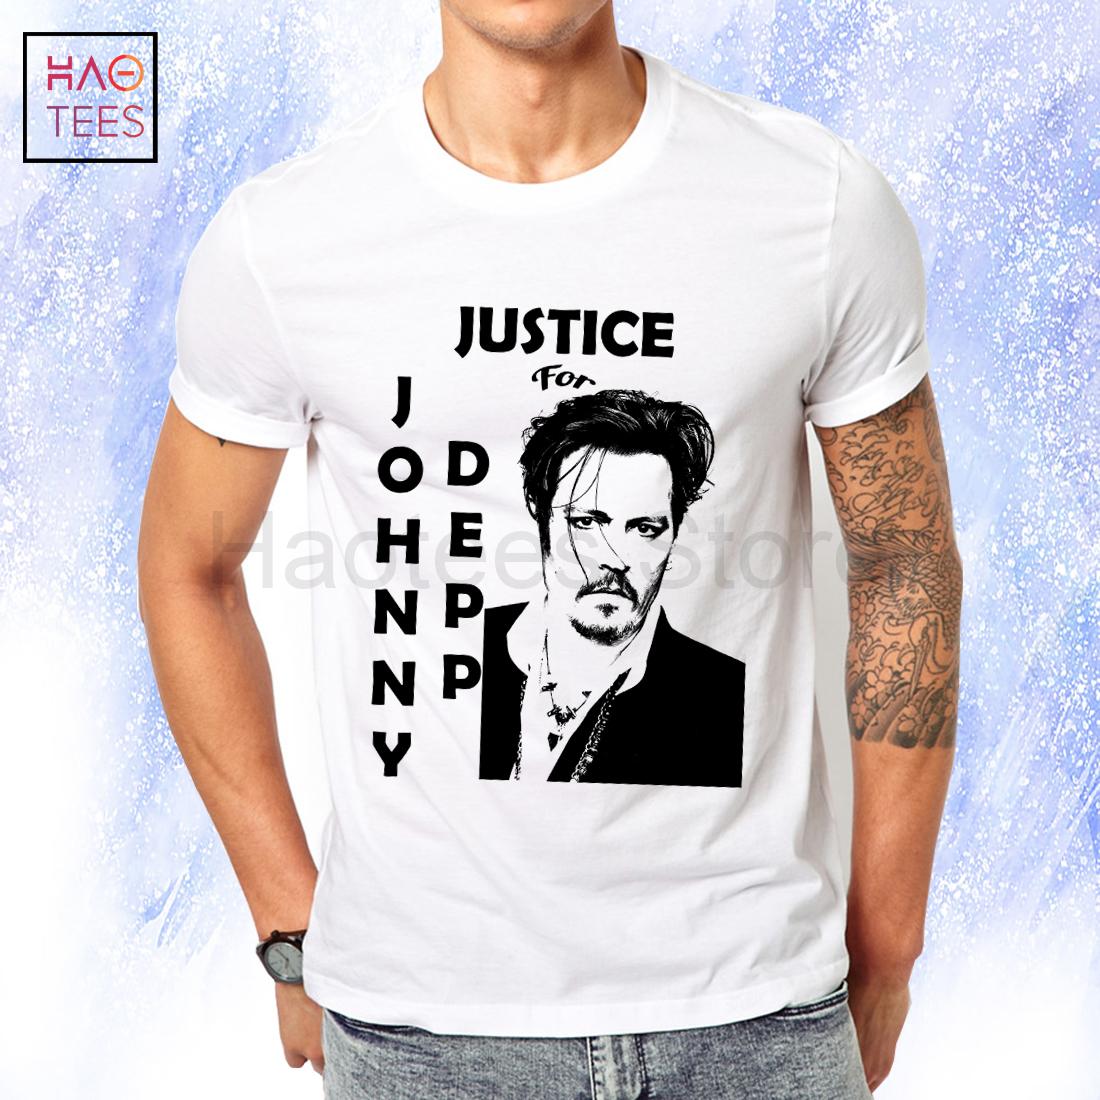 Maybe They’re Hearsay Papers Shirt, Johnny Depp Shirt, Justice For Johnny Depp Shirt